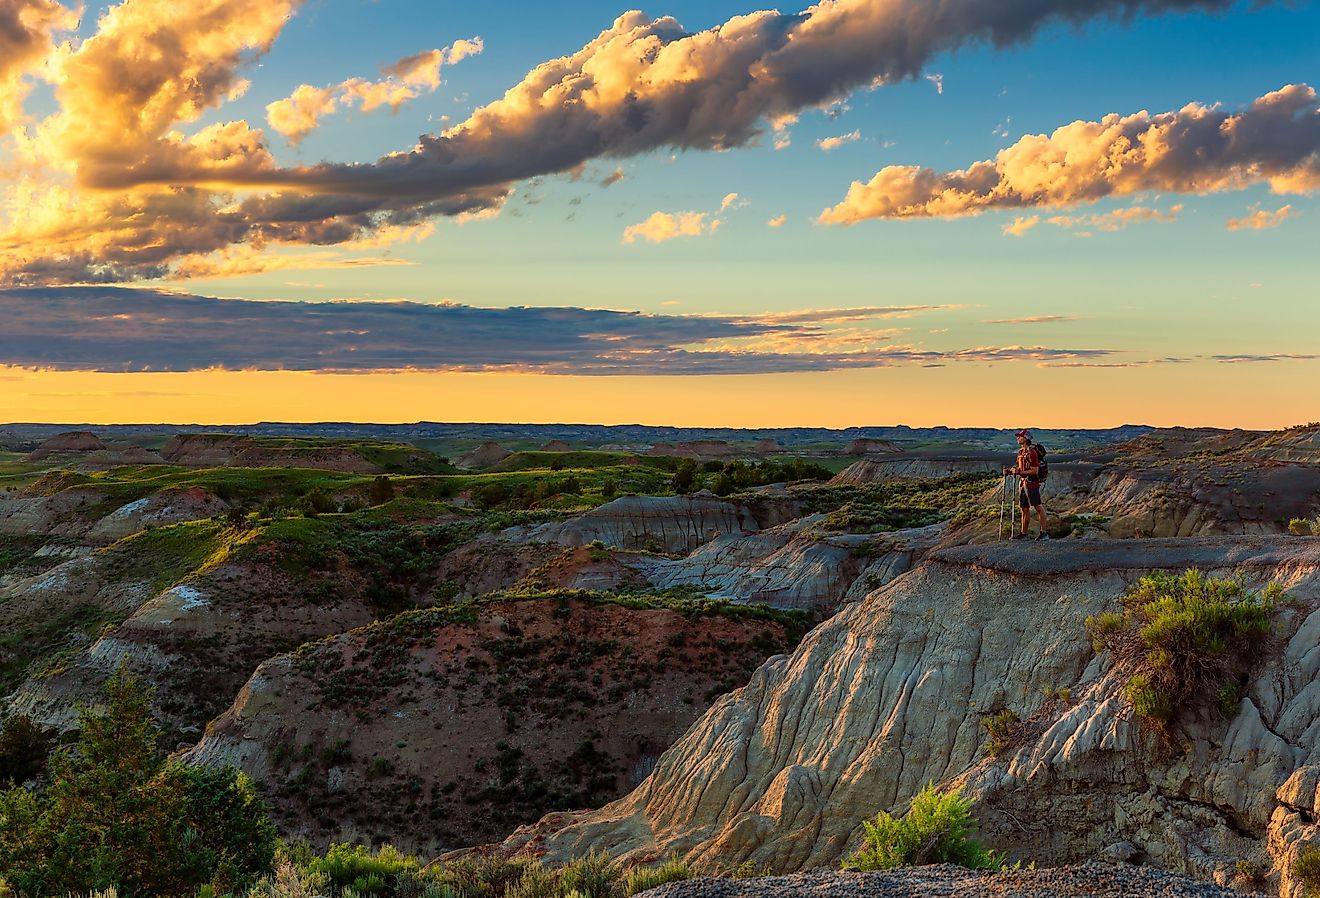 Looking out over the badlands of Theodore Roosevelt National Park, North Dakota